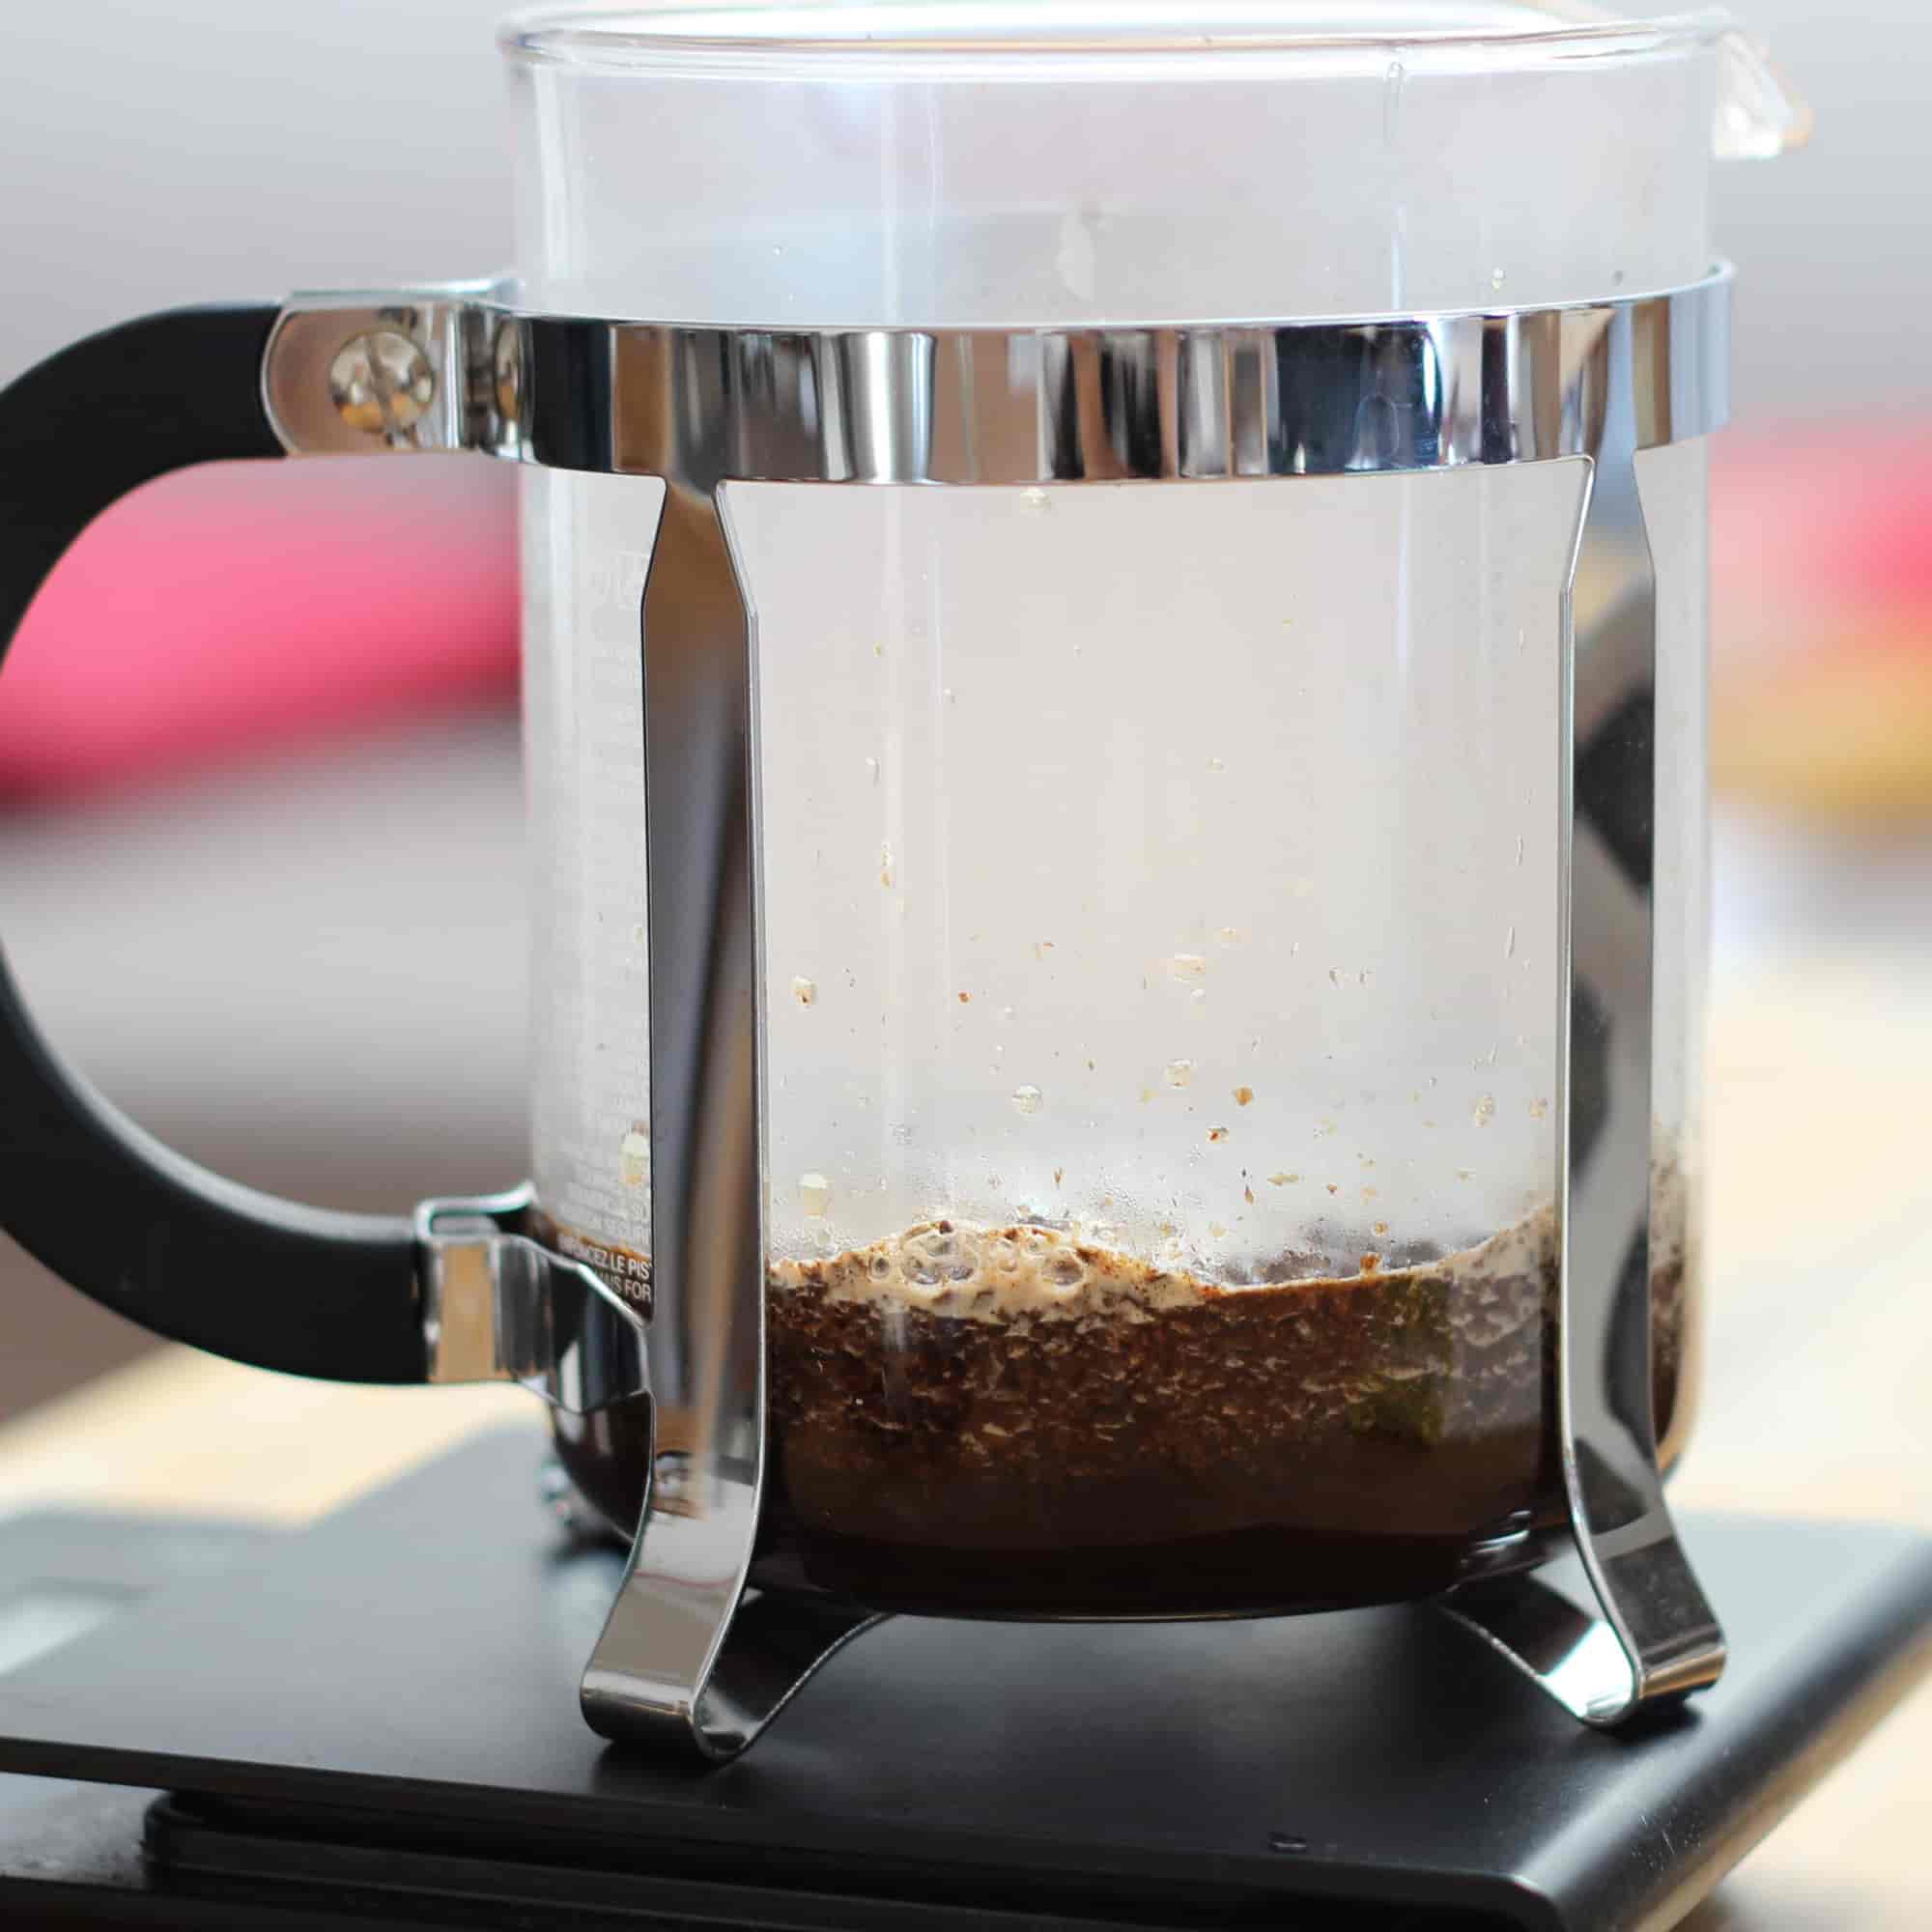 6 Tips to Make the Best Coffee From Your French Press